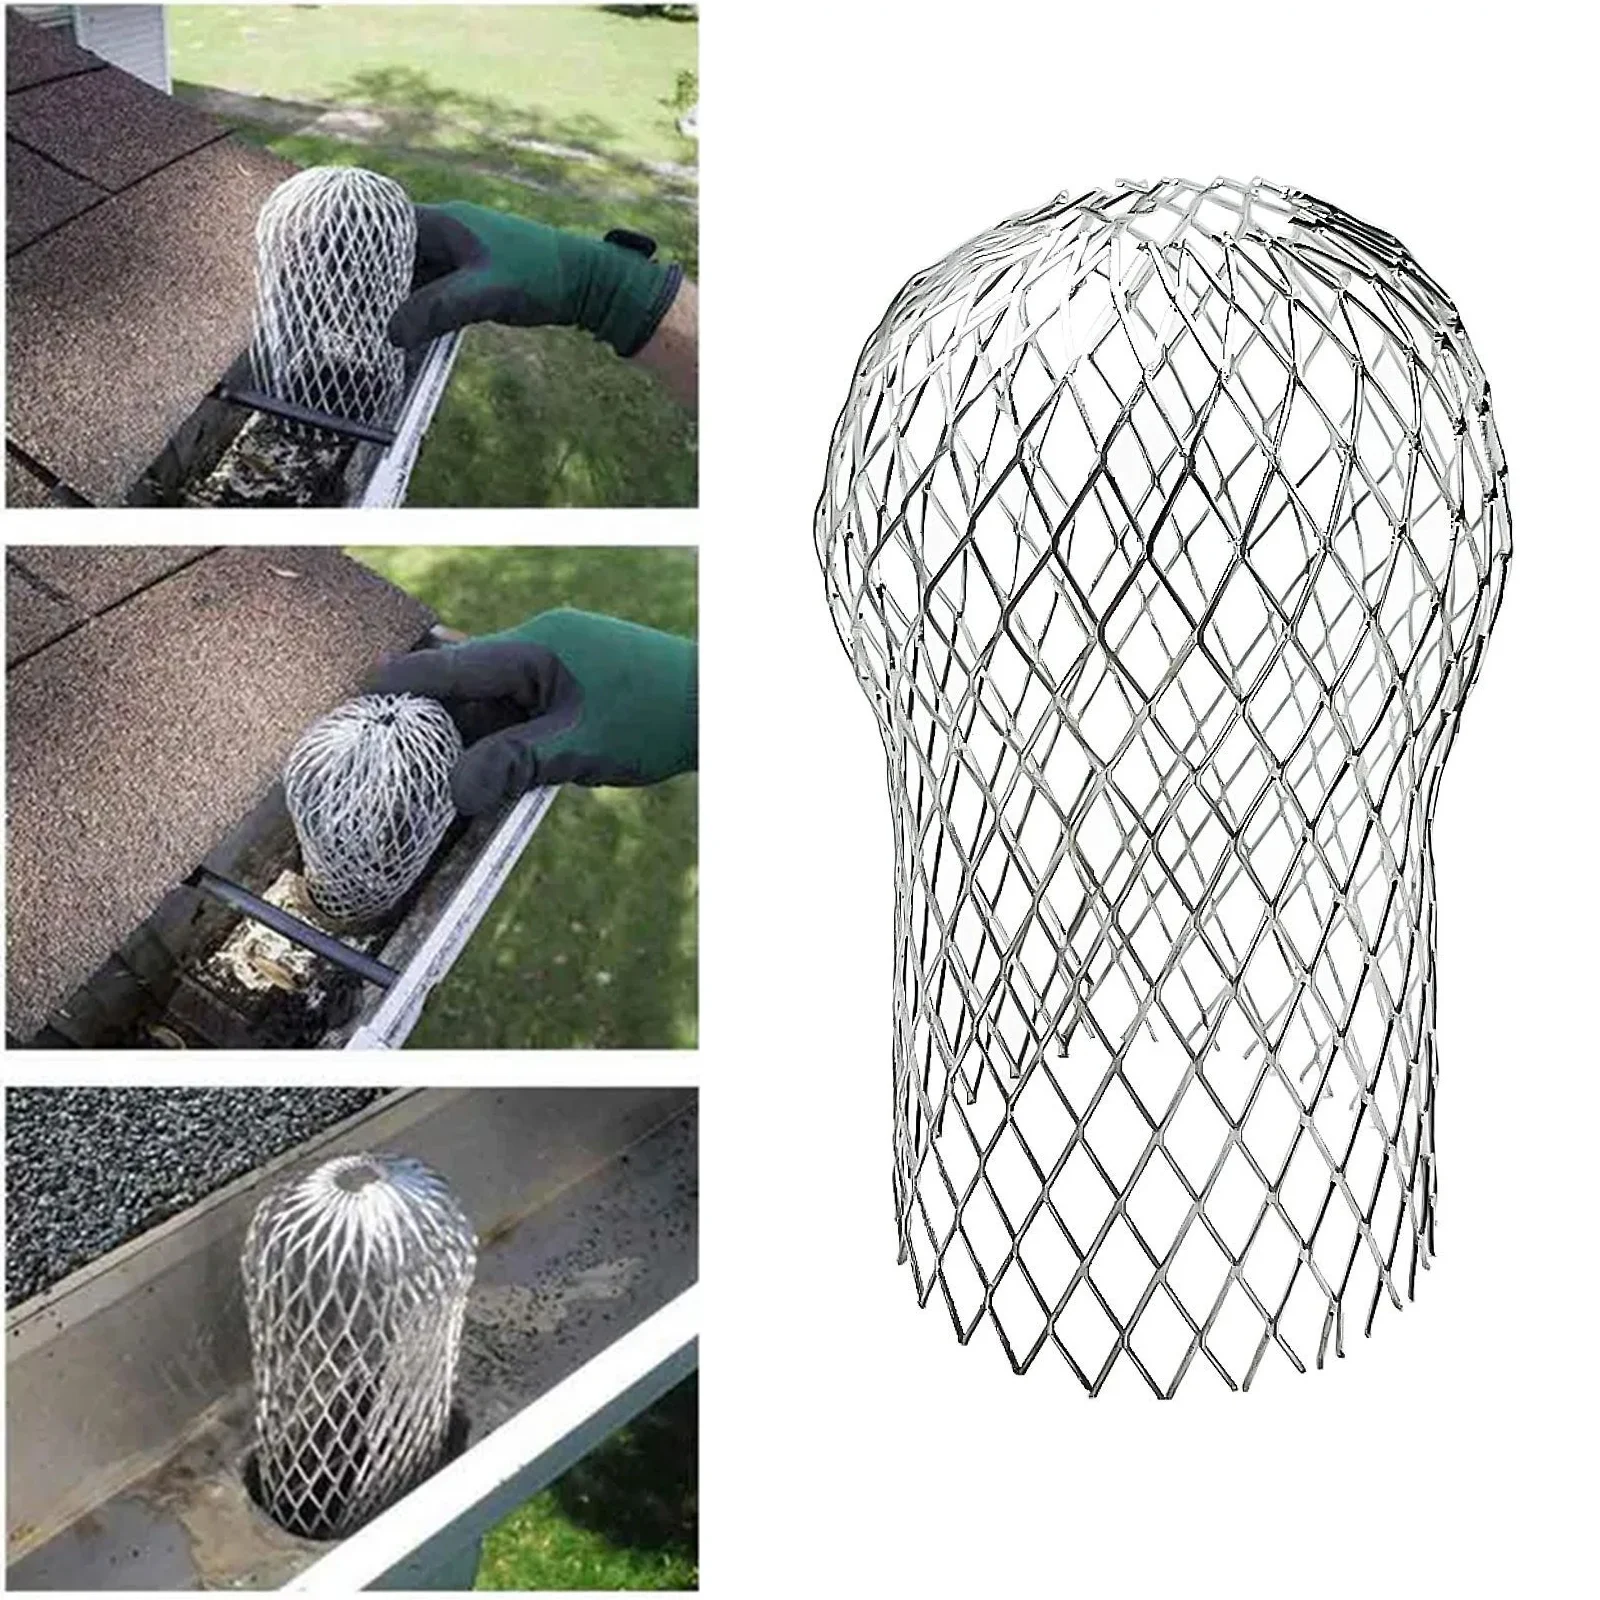 Rain Gutters Roof Guard Filters 3 Inch Expand Aluminum Filter Strainer Stops Blockage Leaf Drains Debris Drain Net Cover